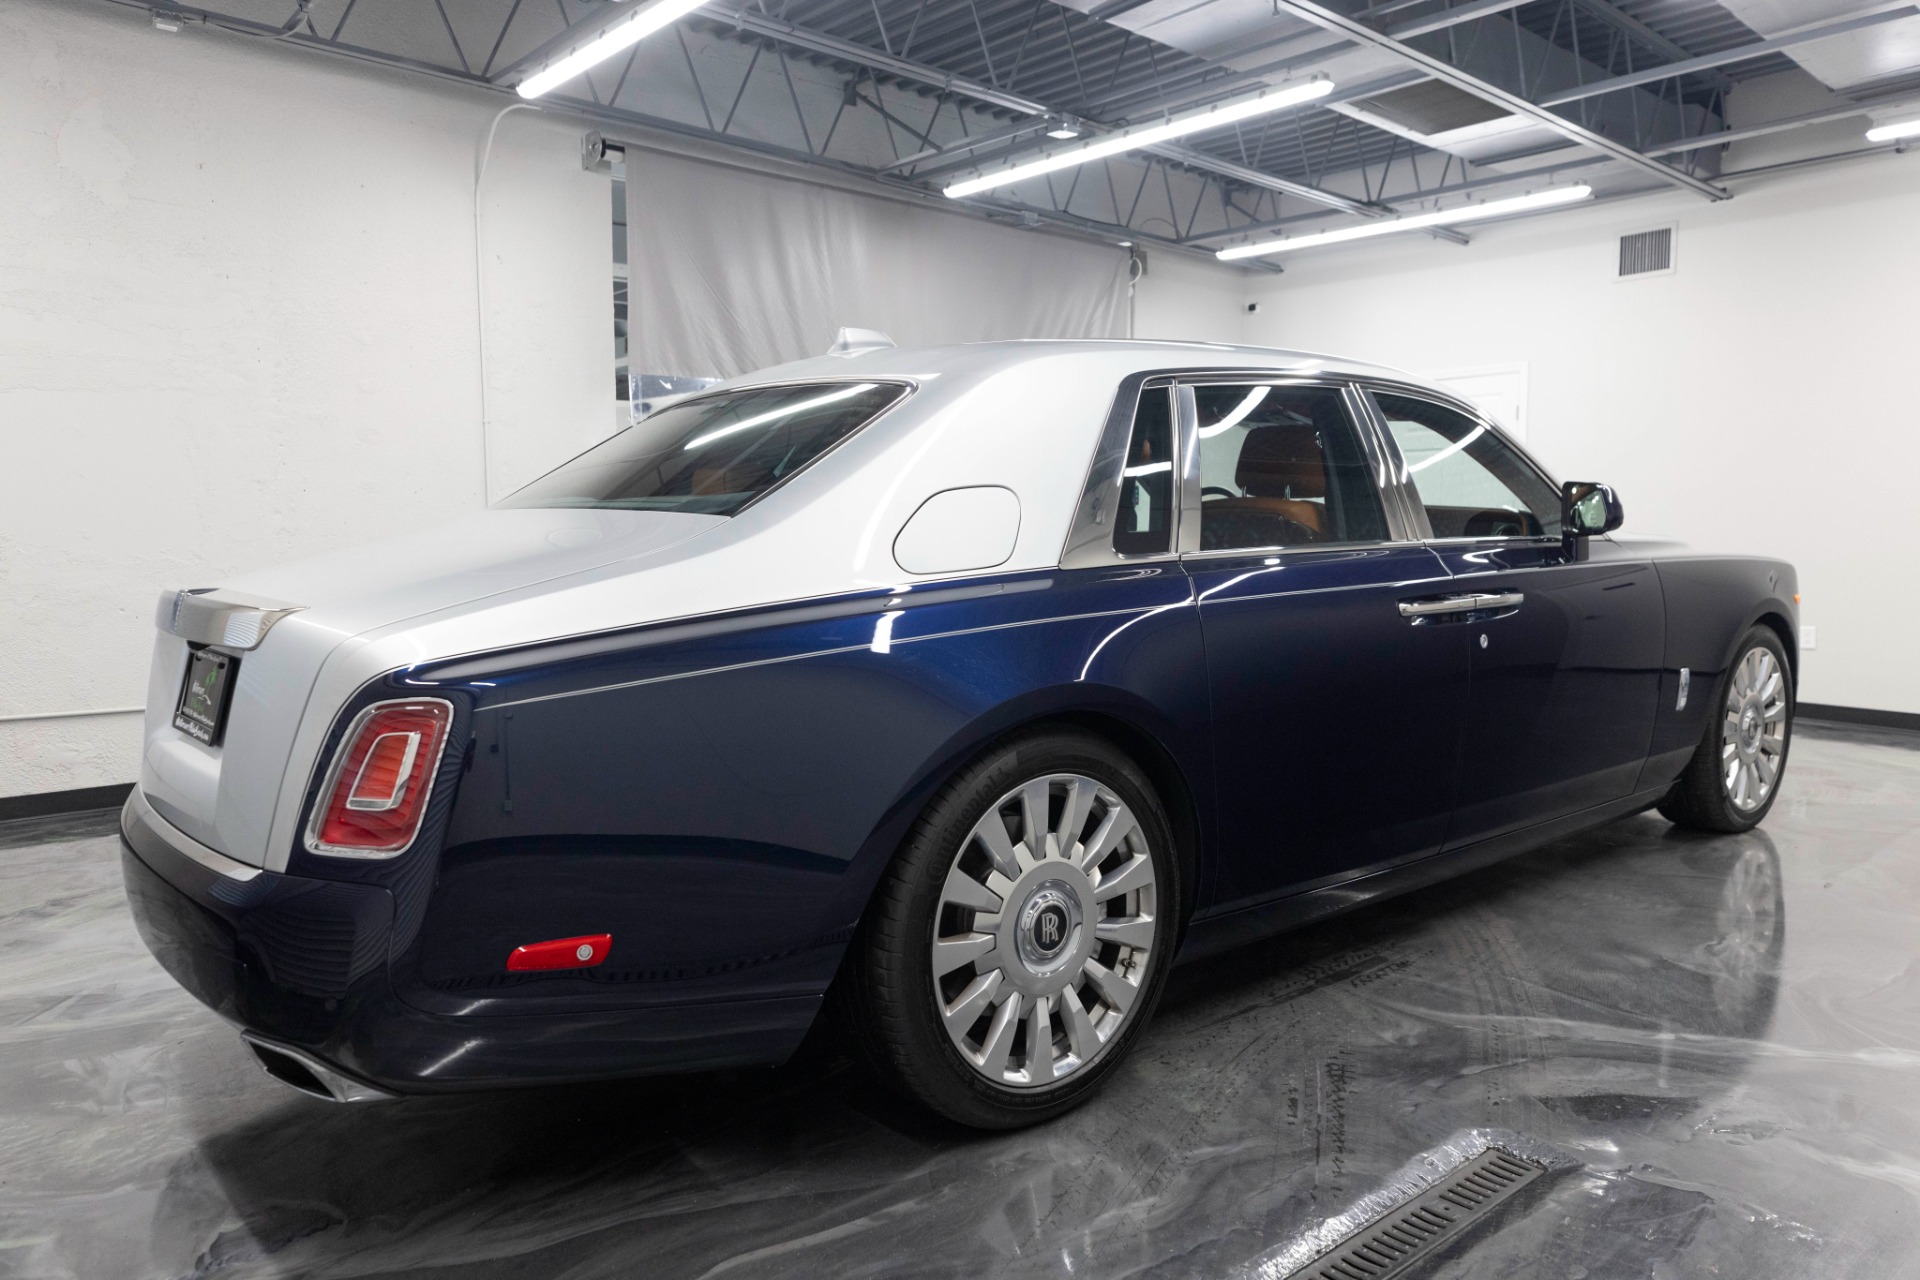 Used Blue RollsRoyce Ghost Cars For Sale  AutoTrader UK